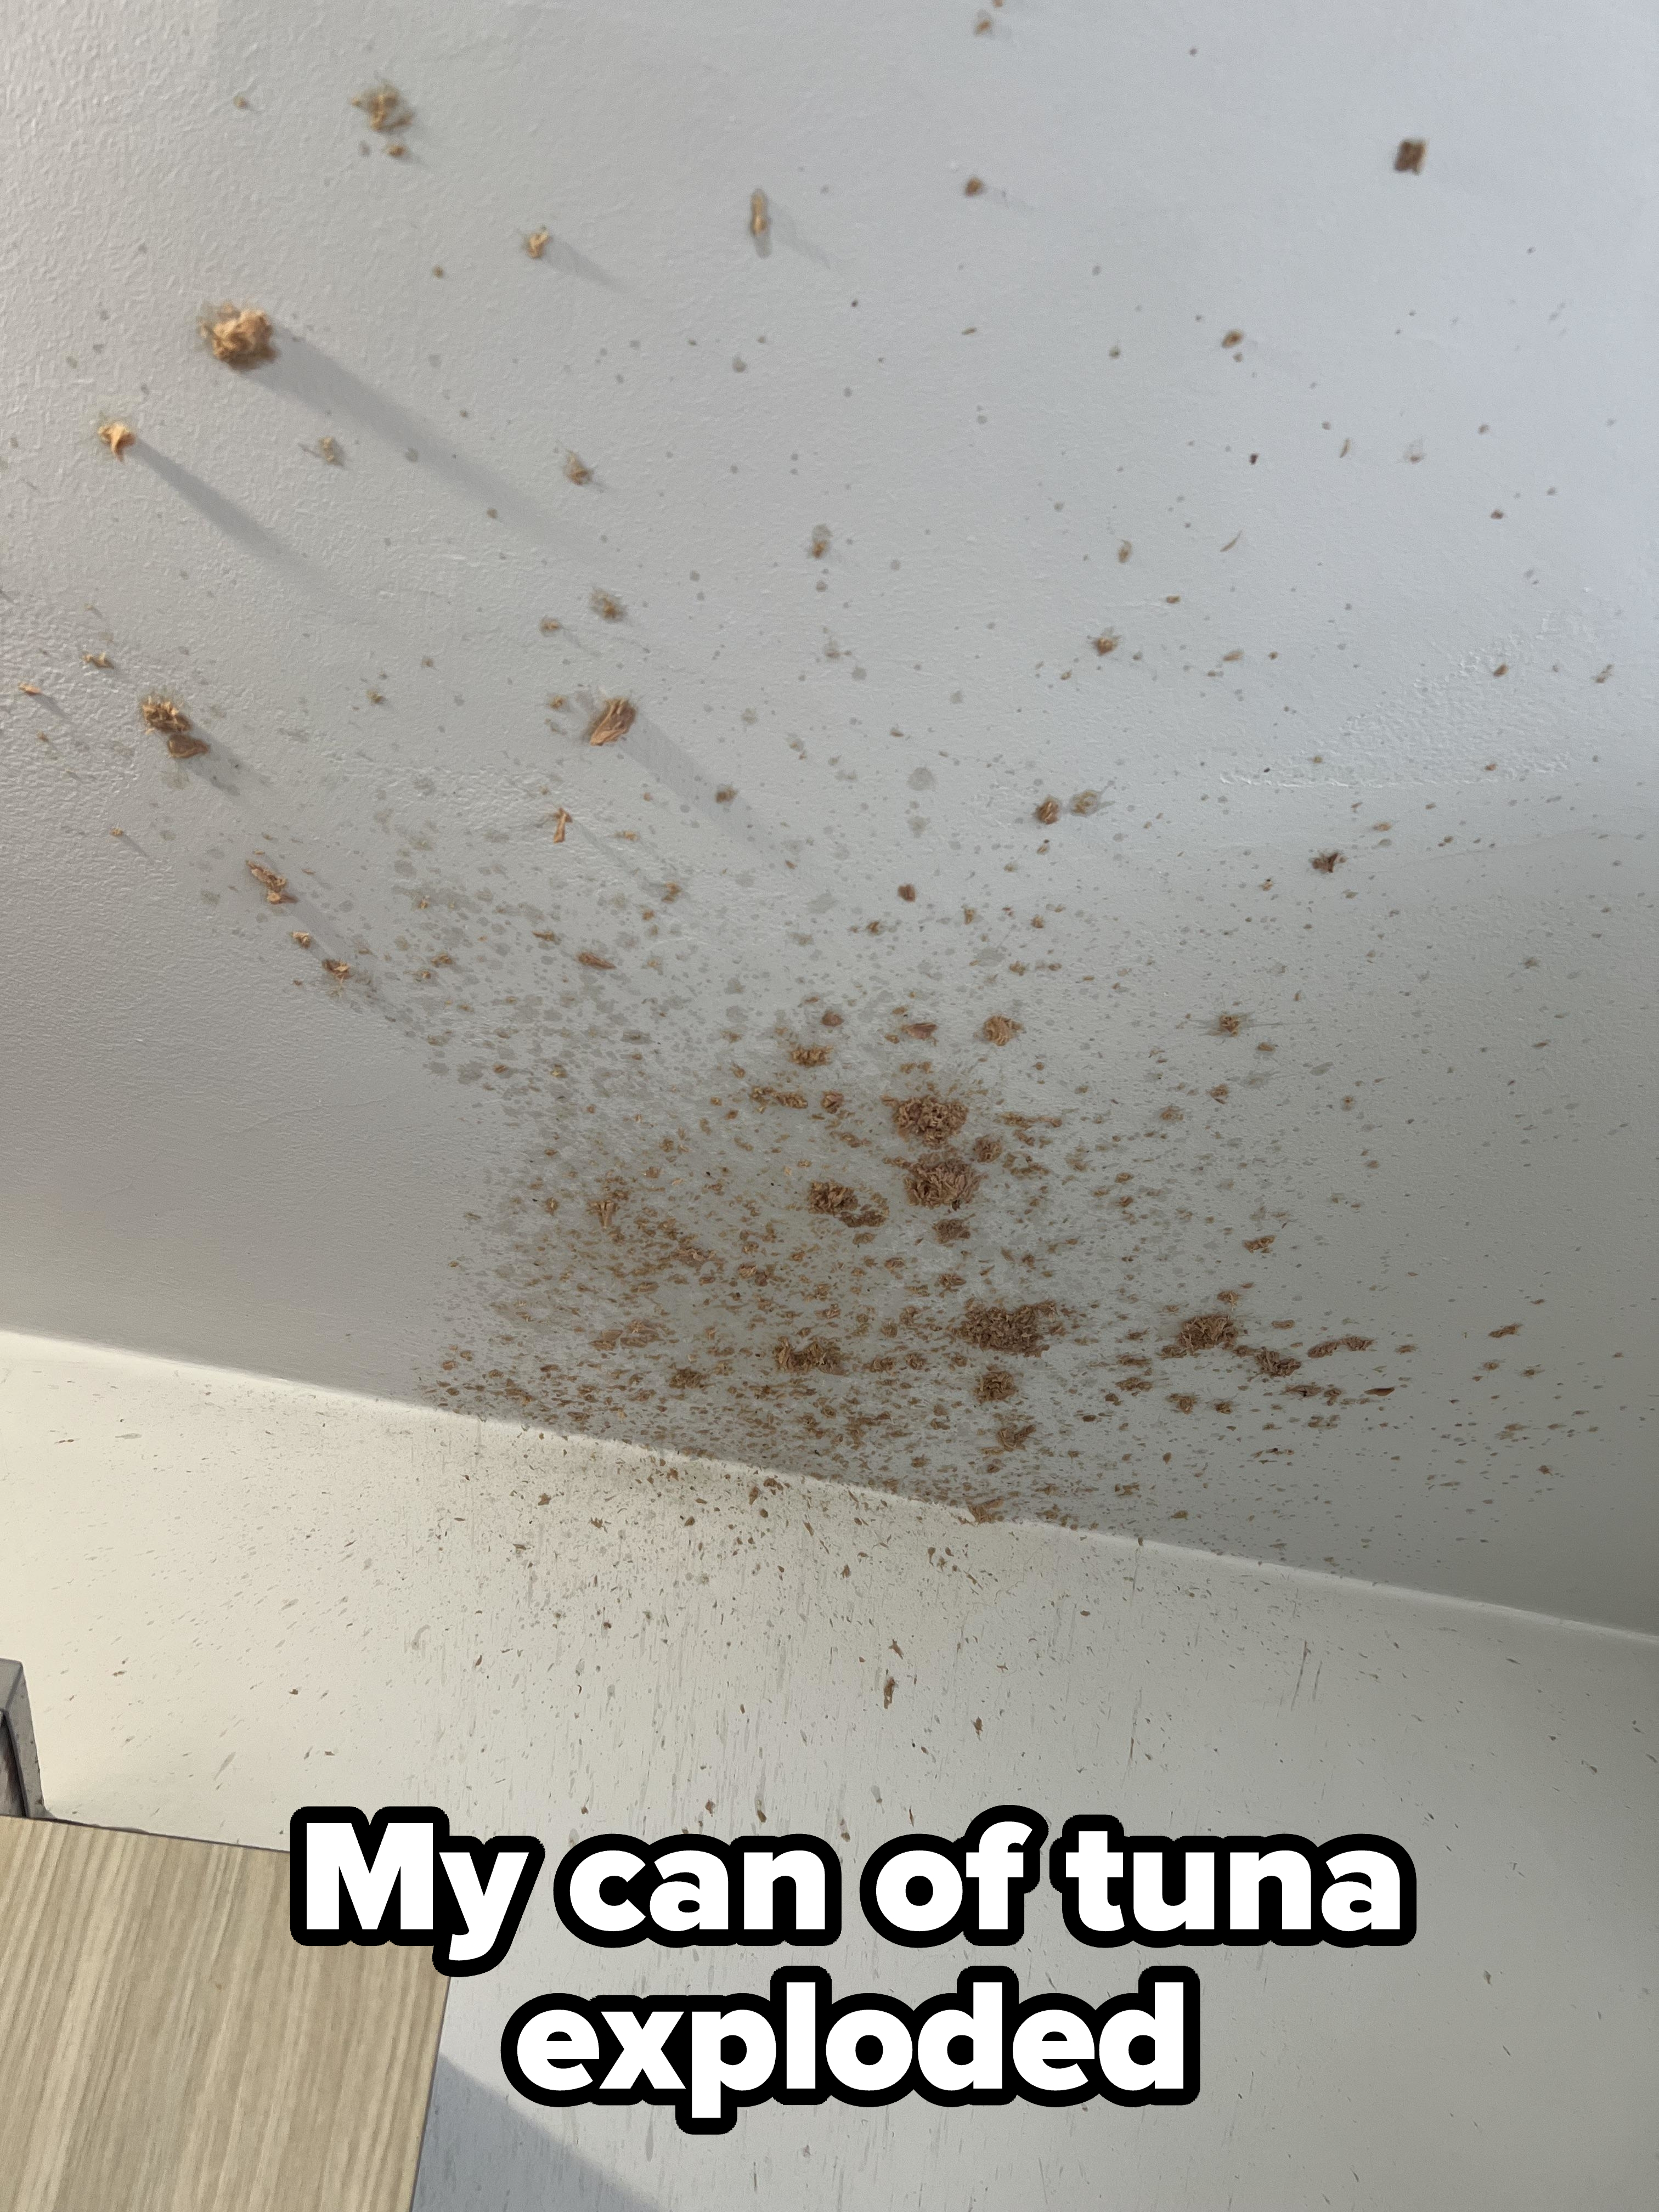 Ceiling splattered with dried cereal or food, likely from an accidental spill or explosion